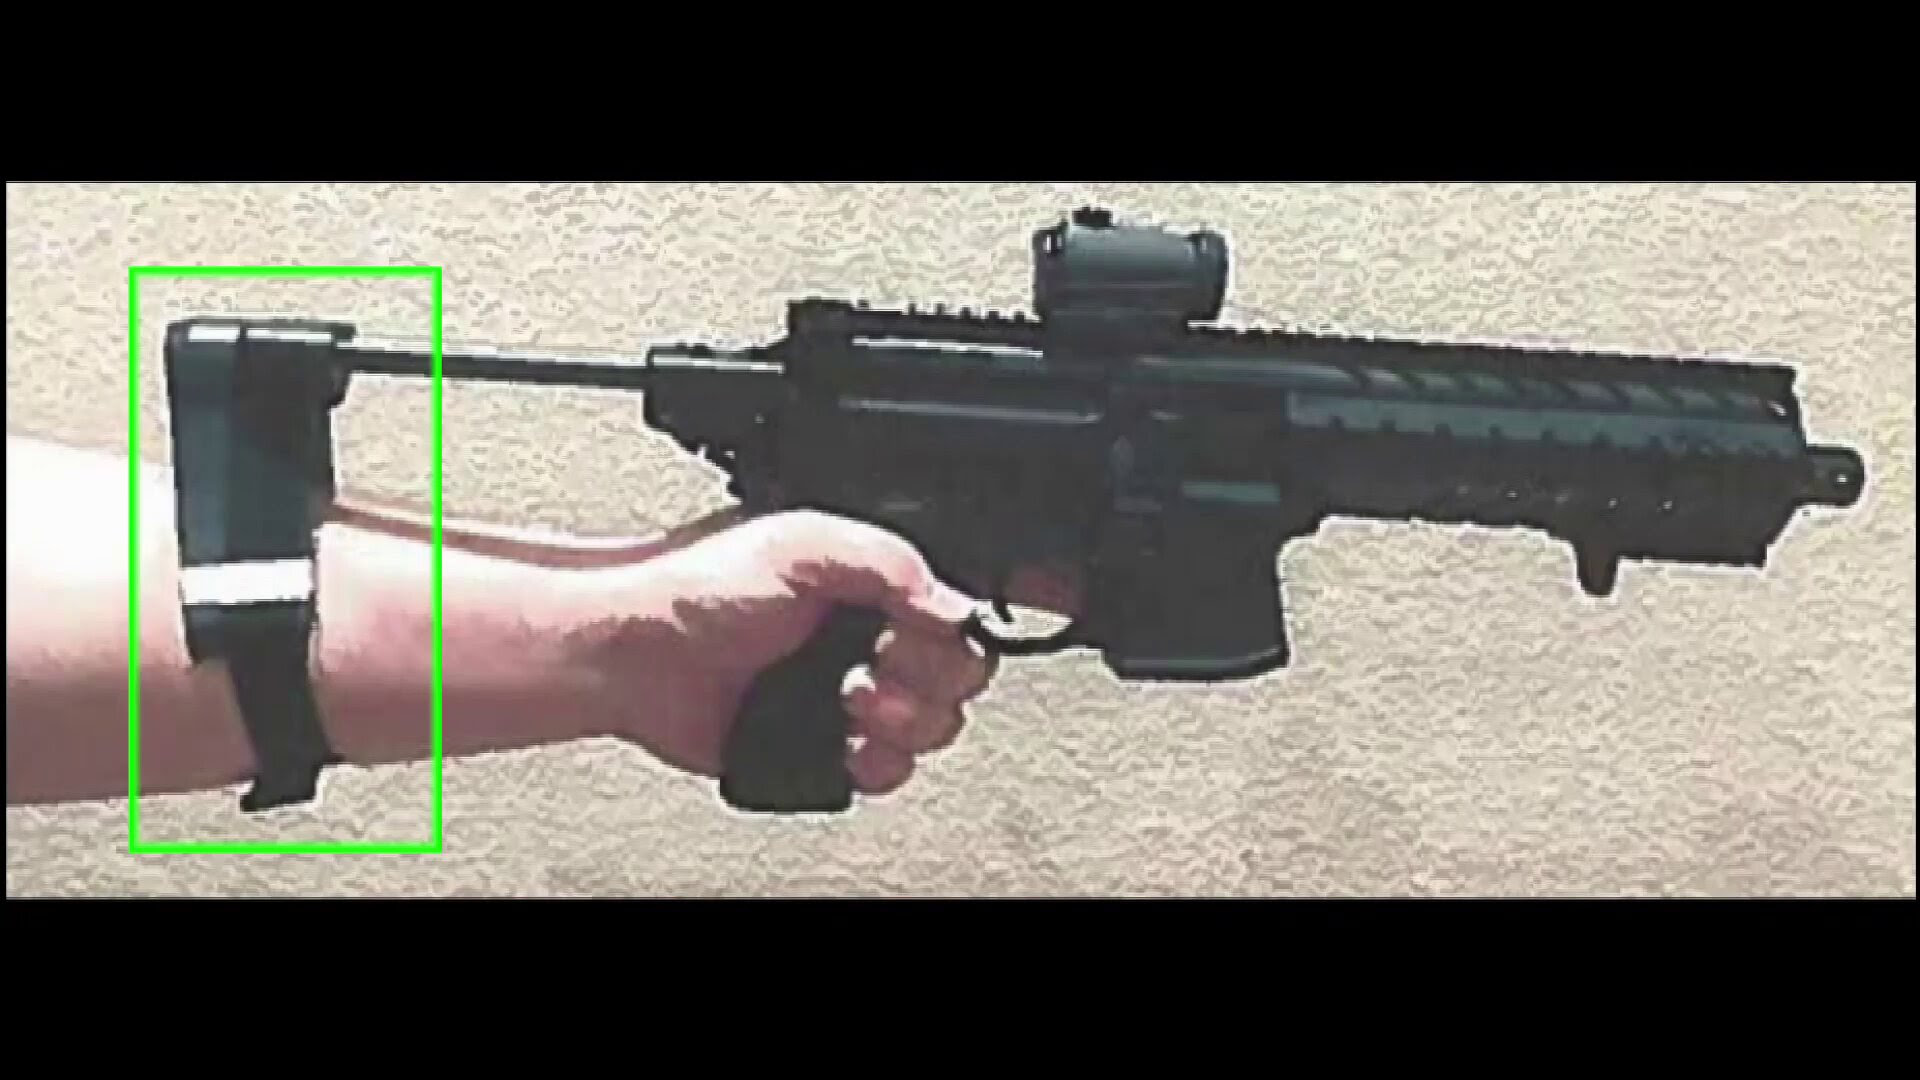 Image of a weapon with an attached pistol brace, the element currently up for discussion in the U.S. Senate. 